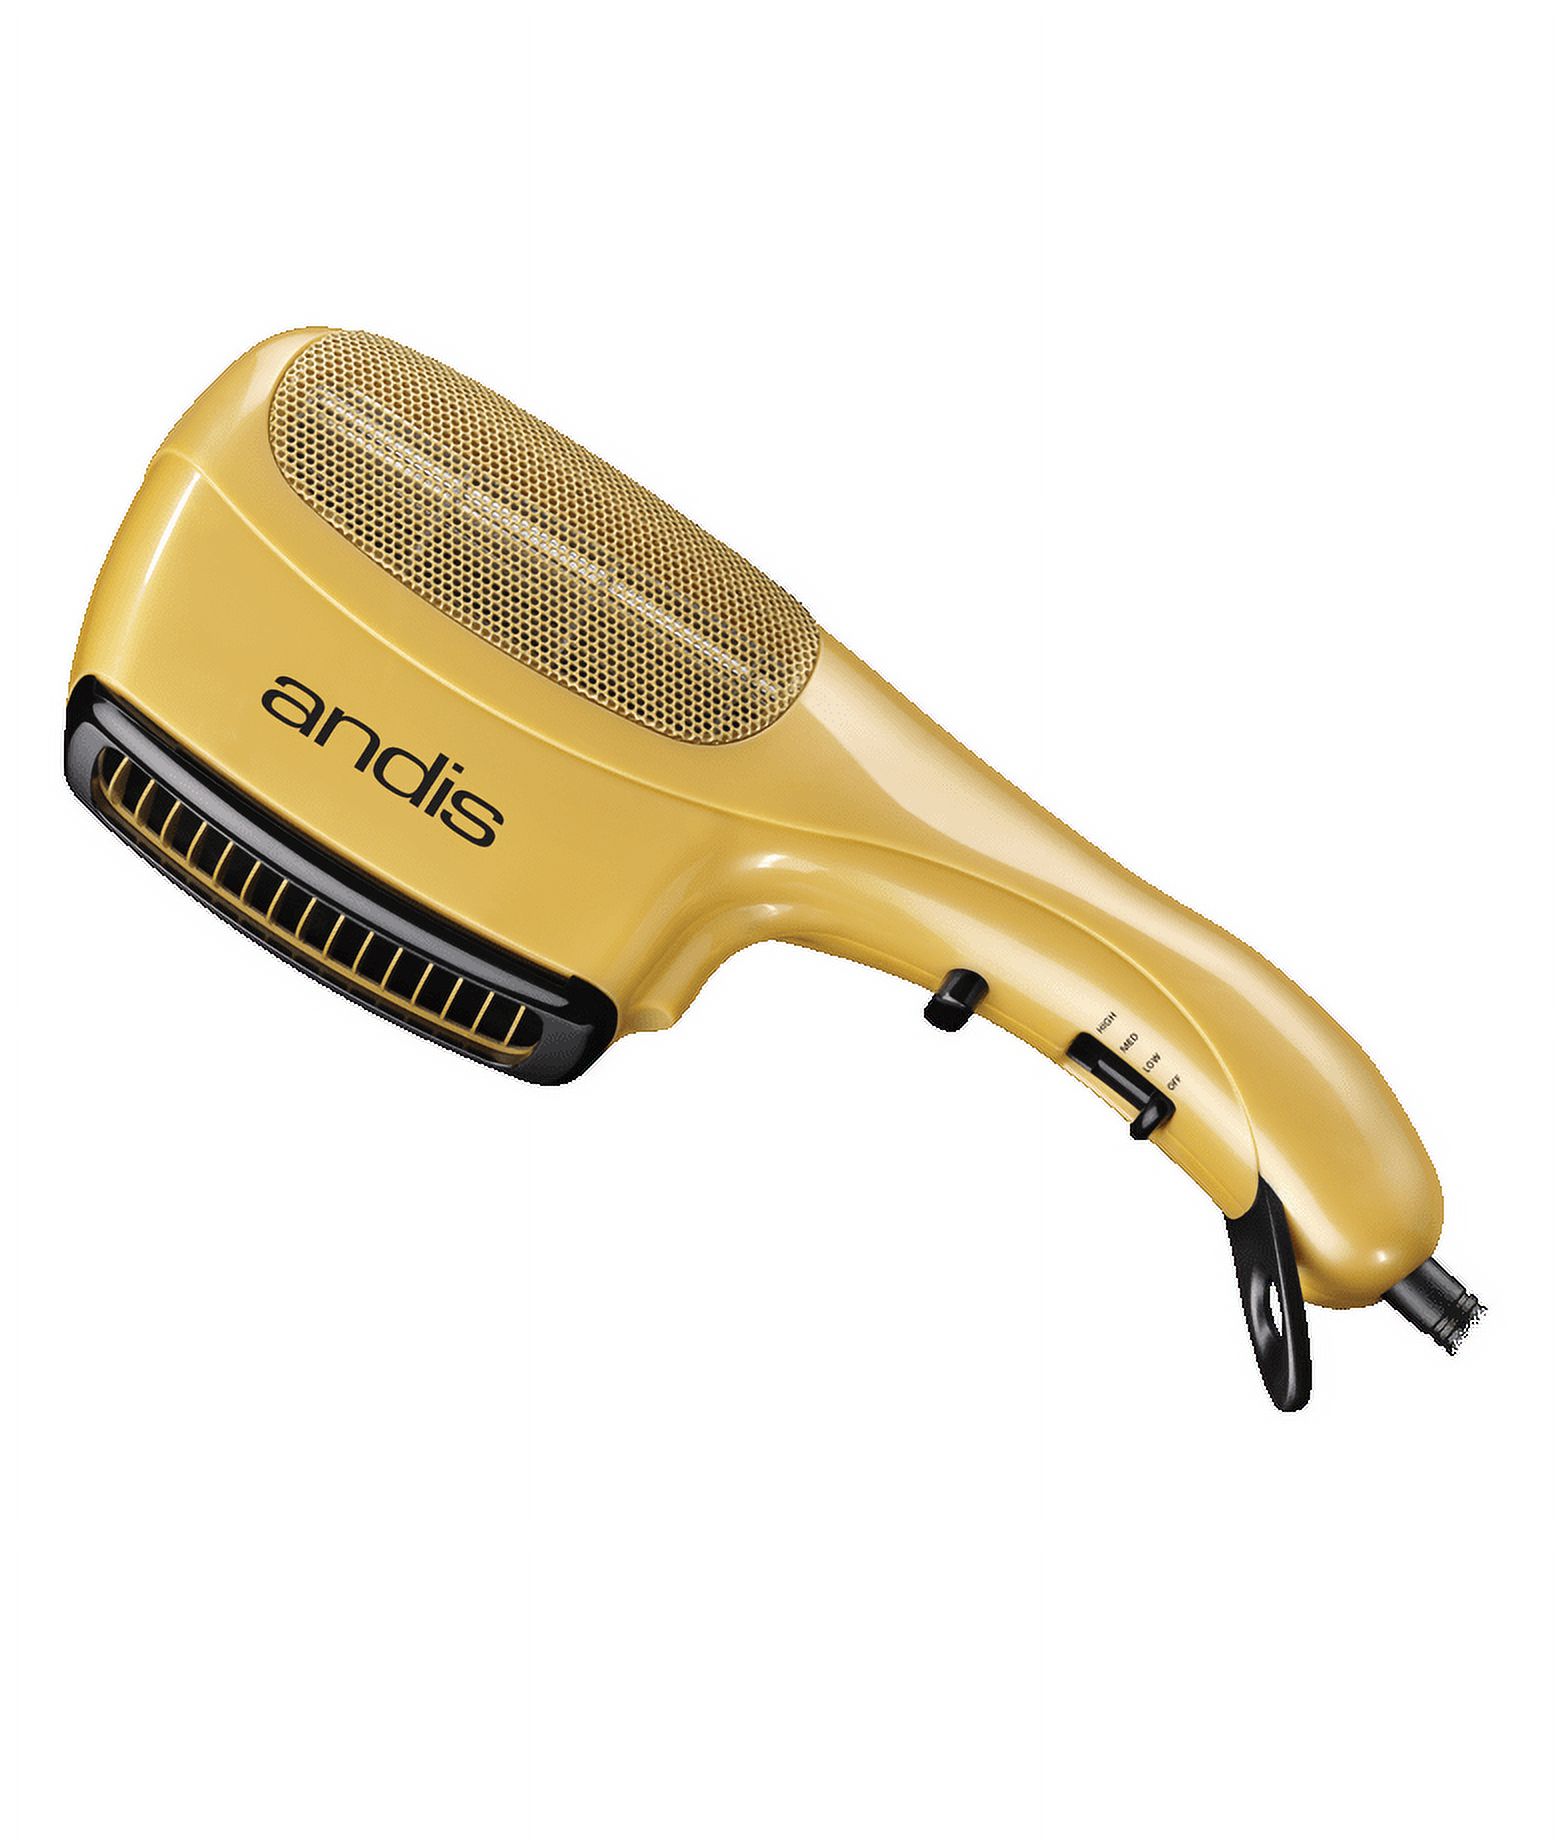 Andis Ceramic Ionic Hair Dryer with Bristle Brush, Fine-Tooth & Wide-Tooth Pick, 1875 Watts, Yellow - image 2 of 8